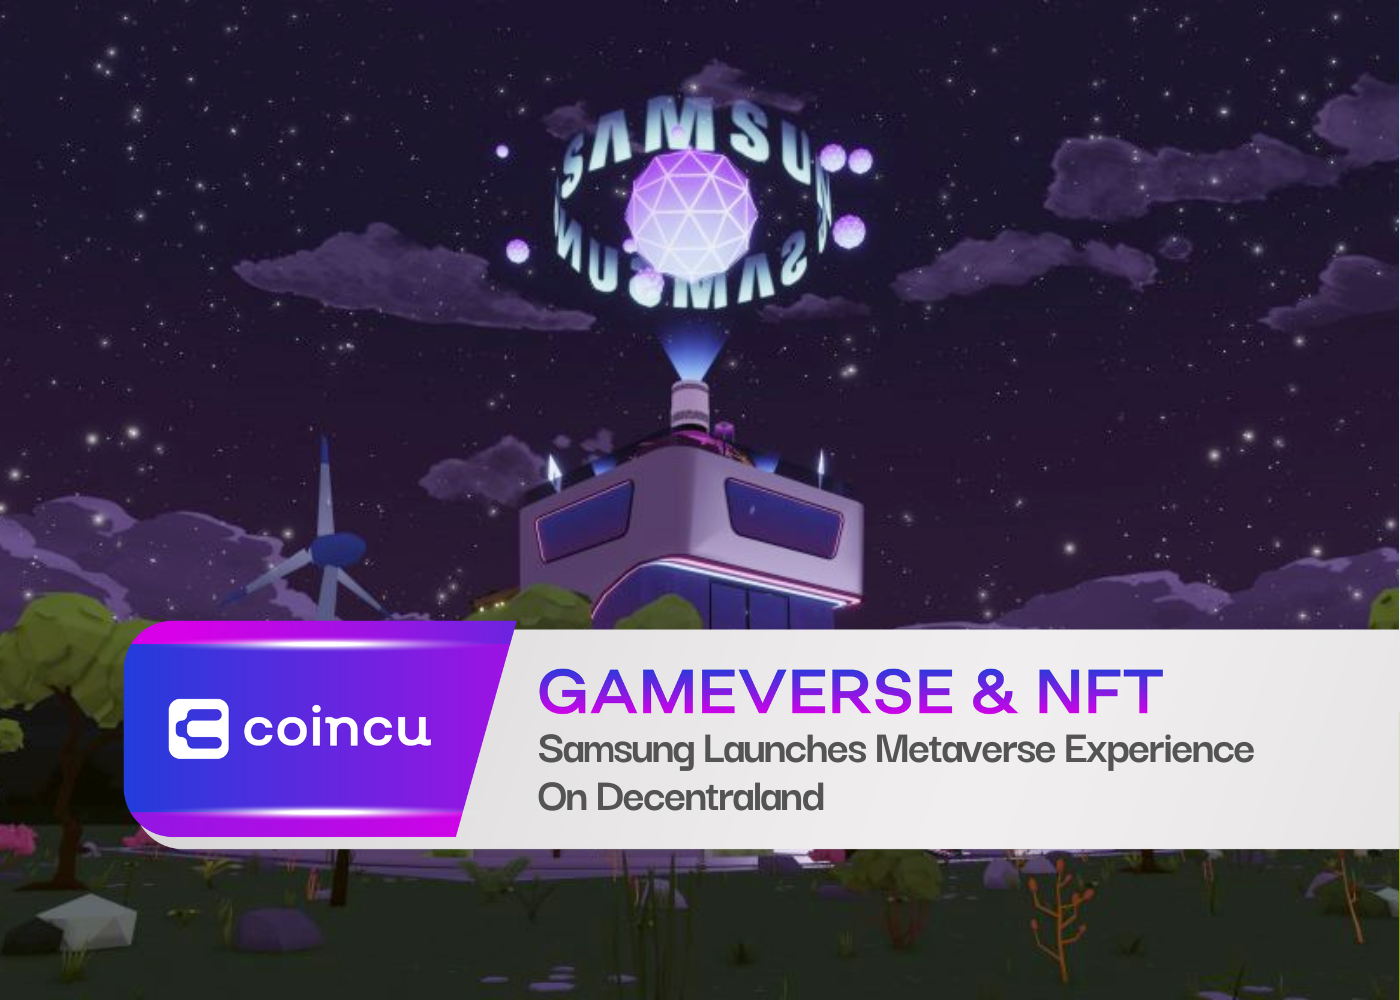 Samsung Launches Metaverse Experience On Decentraland